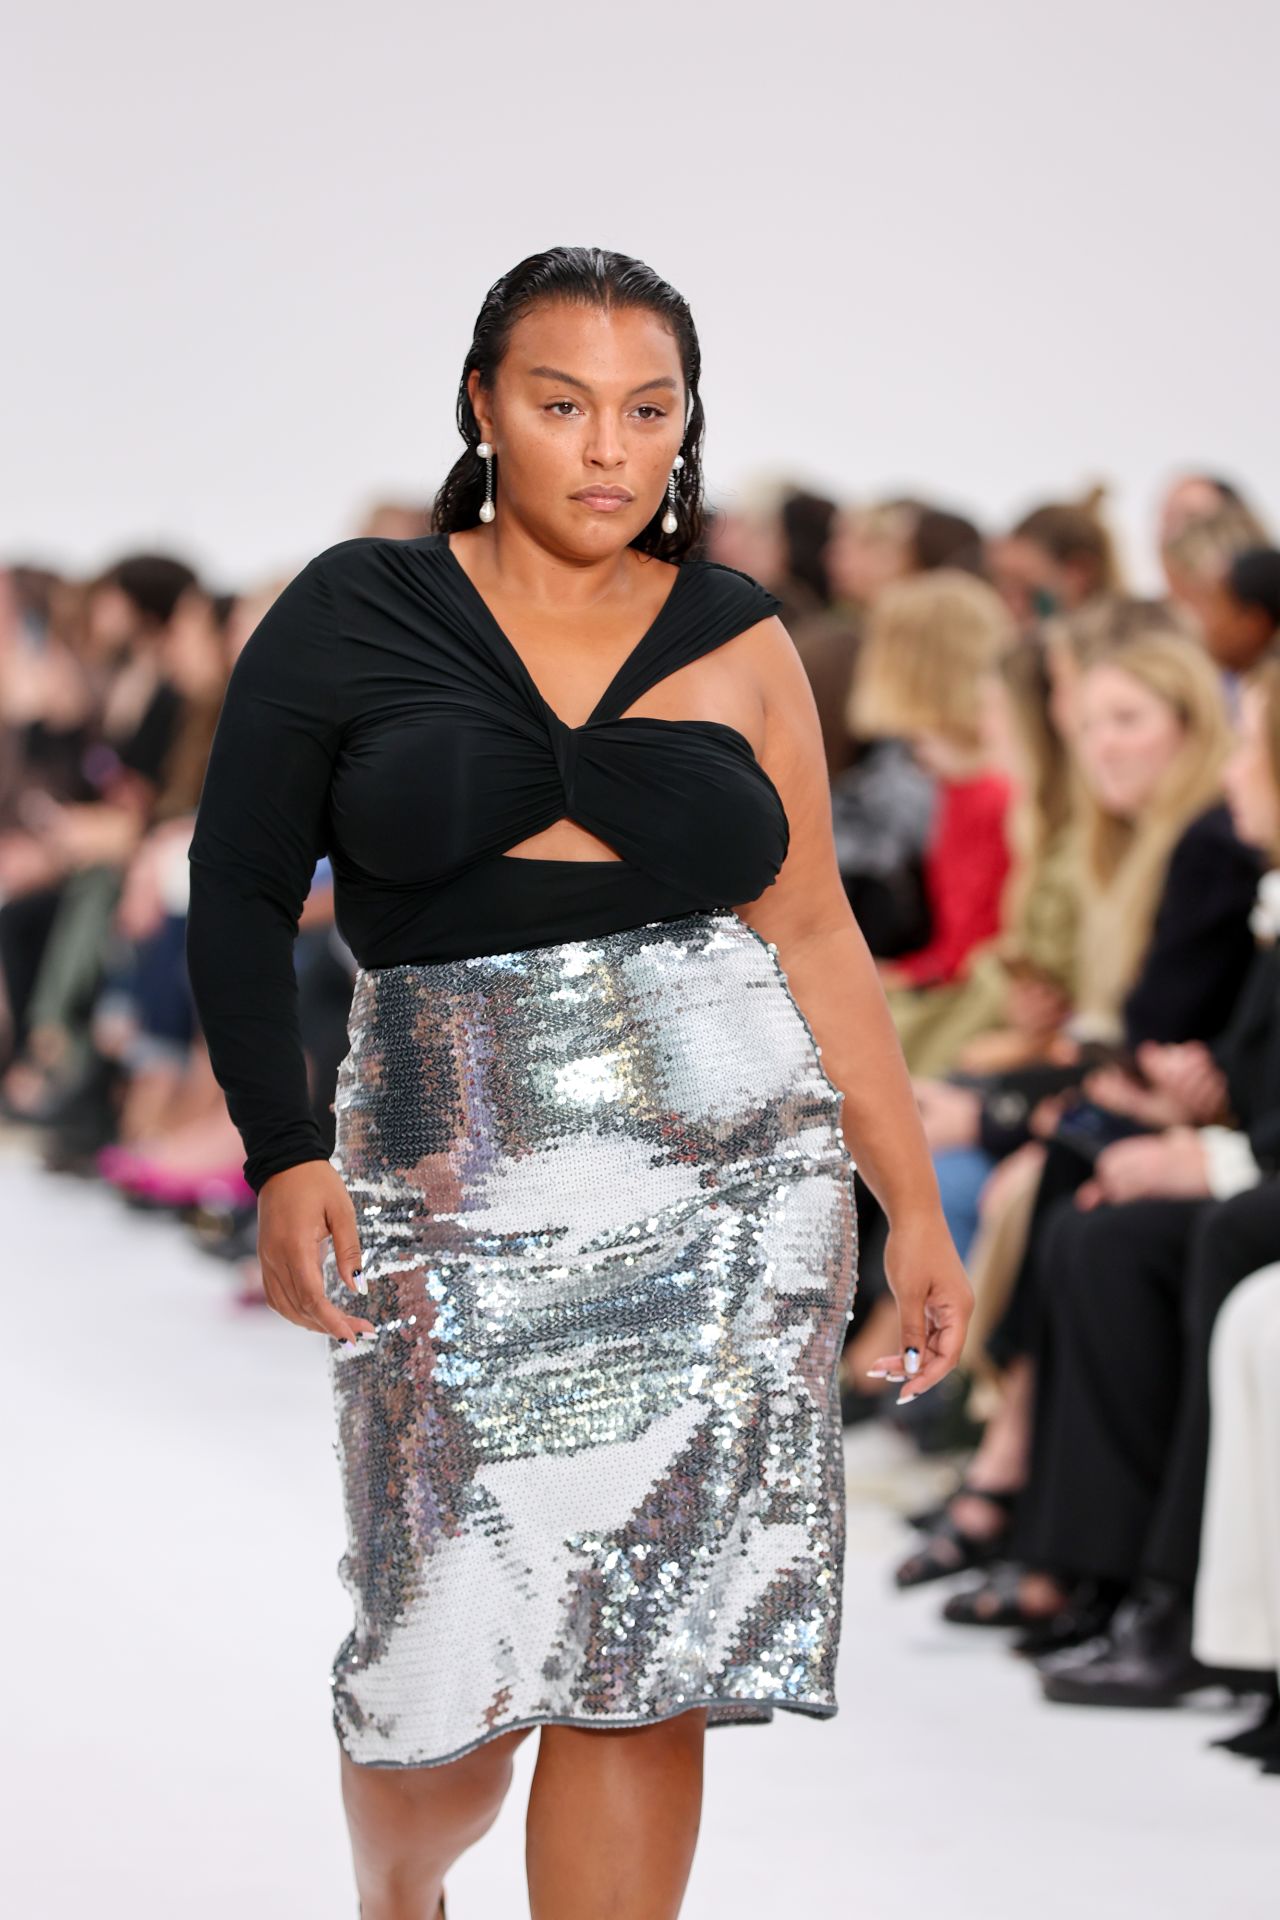 Elsesser is credited with pushing labels to be more size inclusive. Here, she walked for Nensi Dojaka's Spring-Summer 2023 show at London Fashion Week. Dojaka is offering larger sizes for the first time.